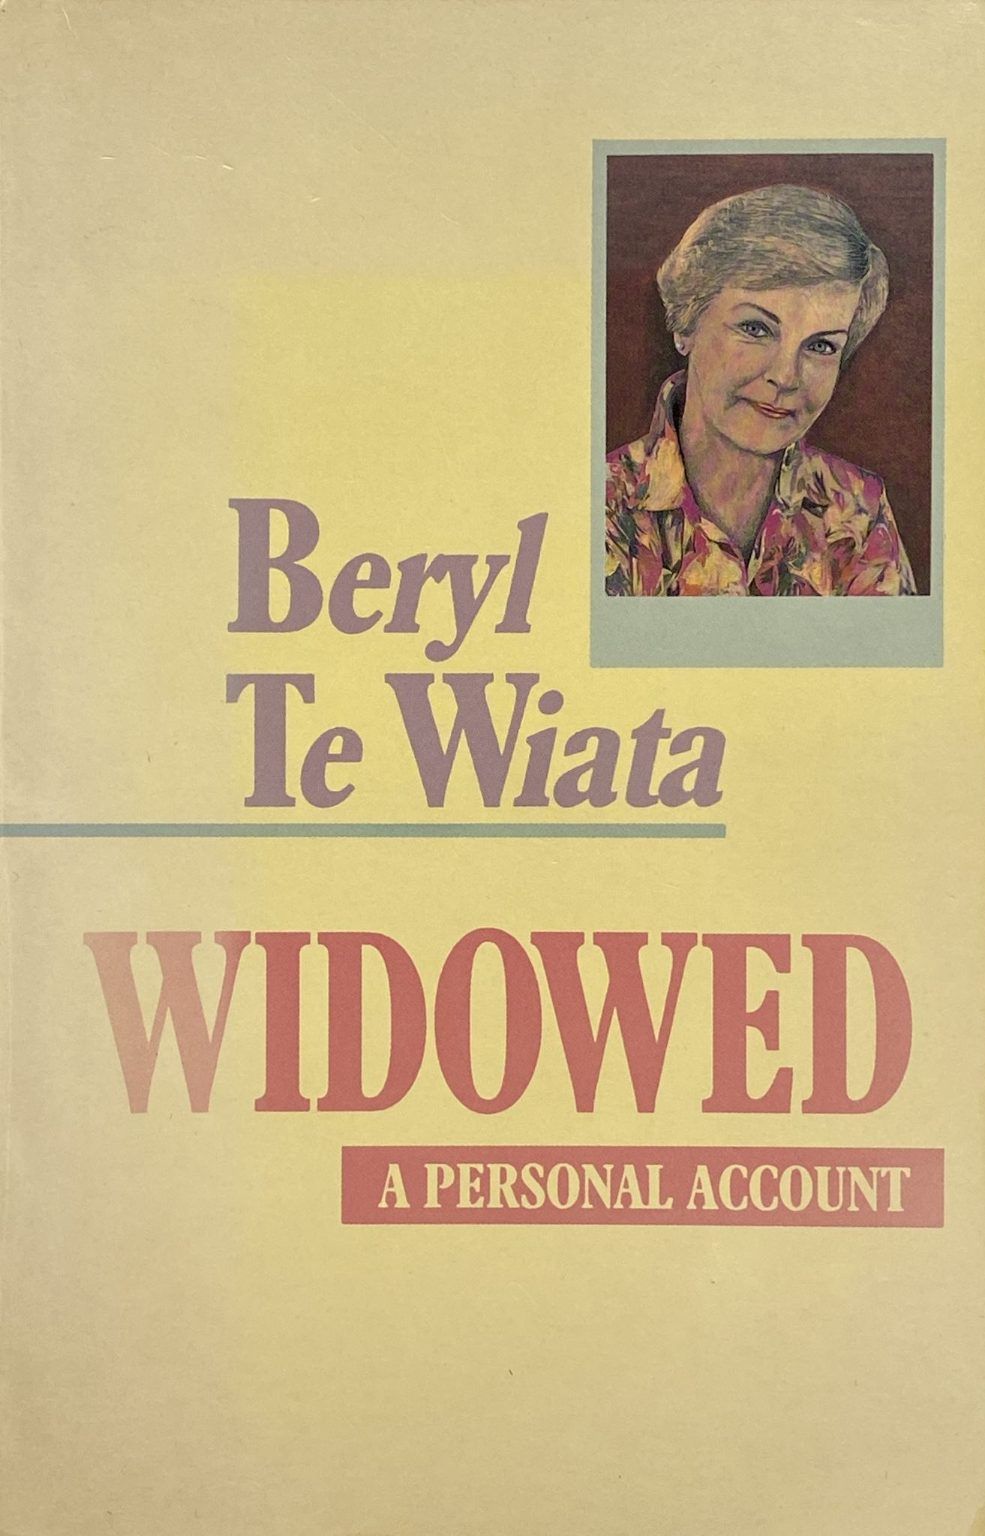 WIDOWED: A Personal Account